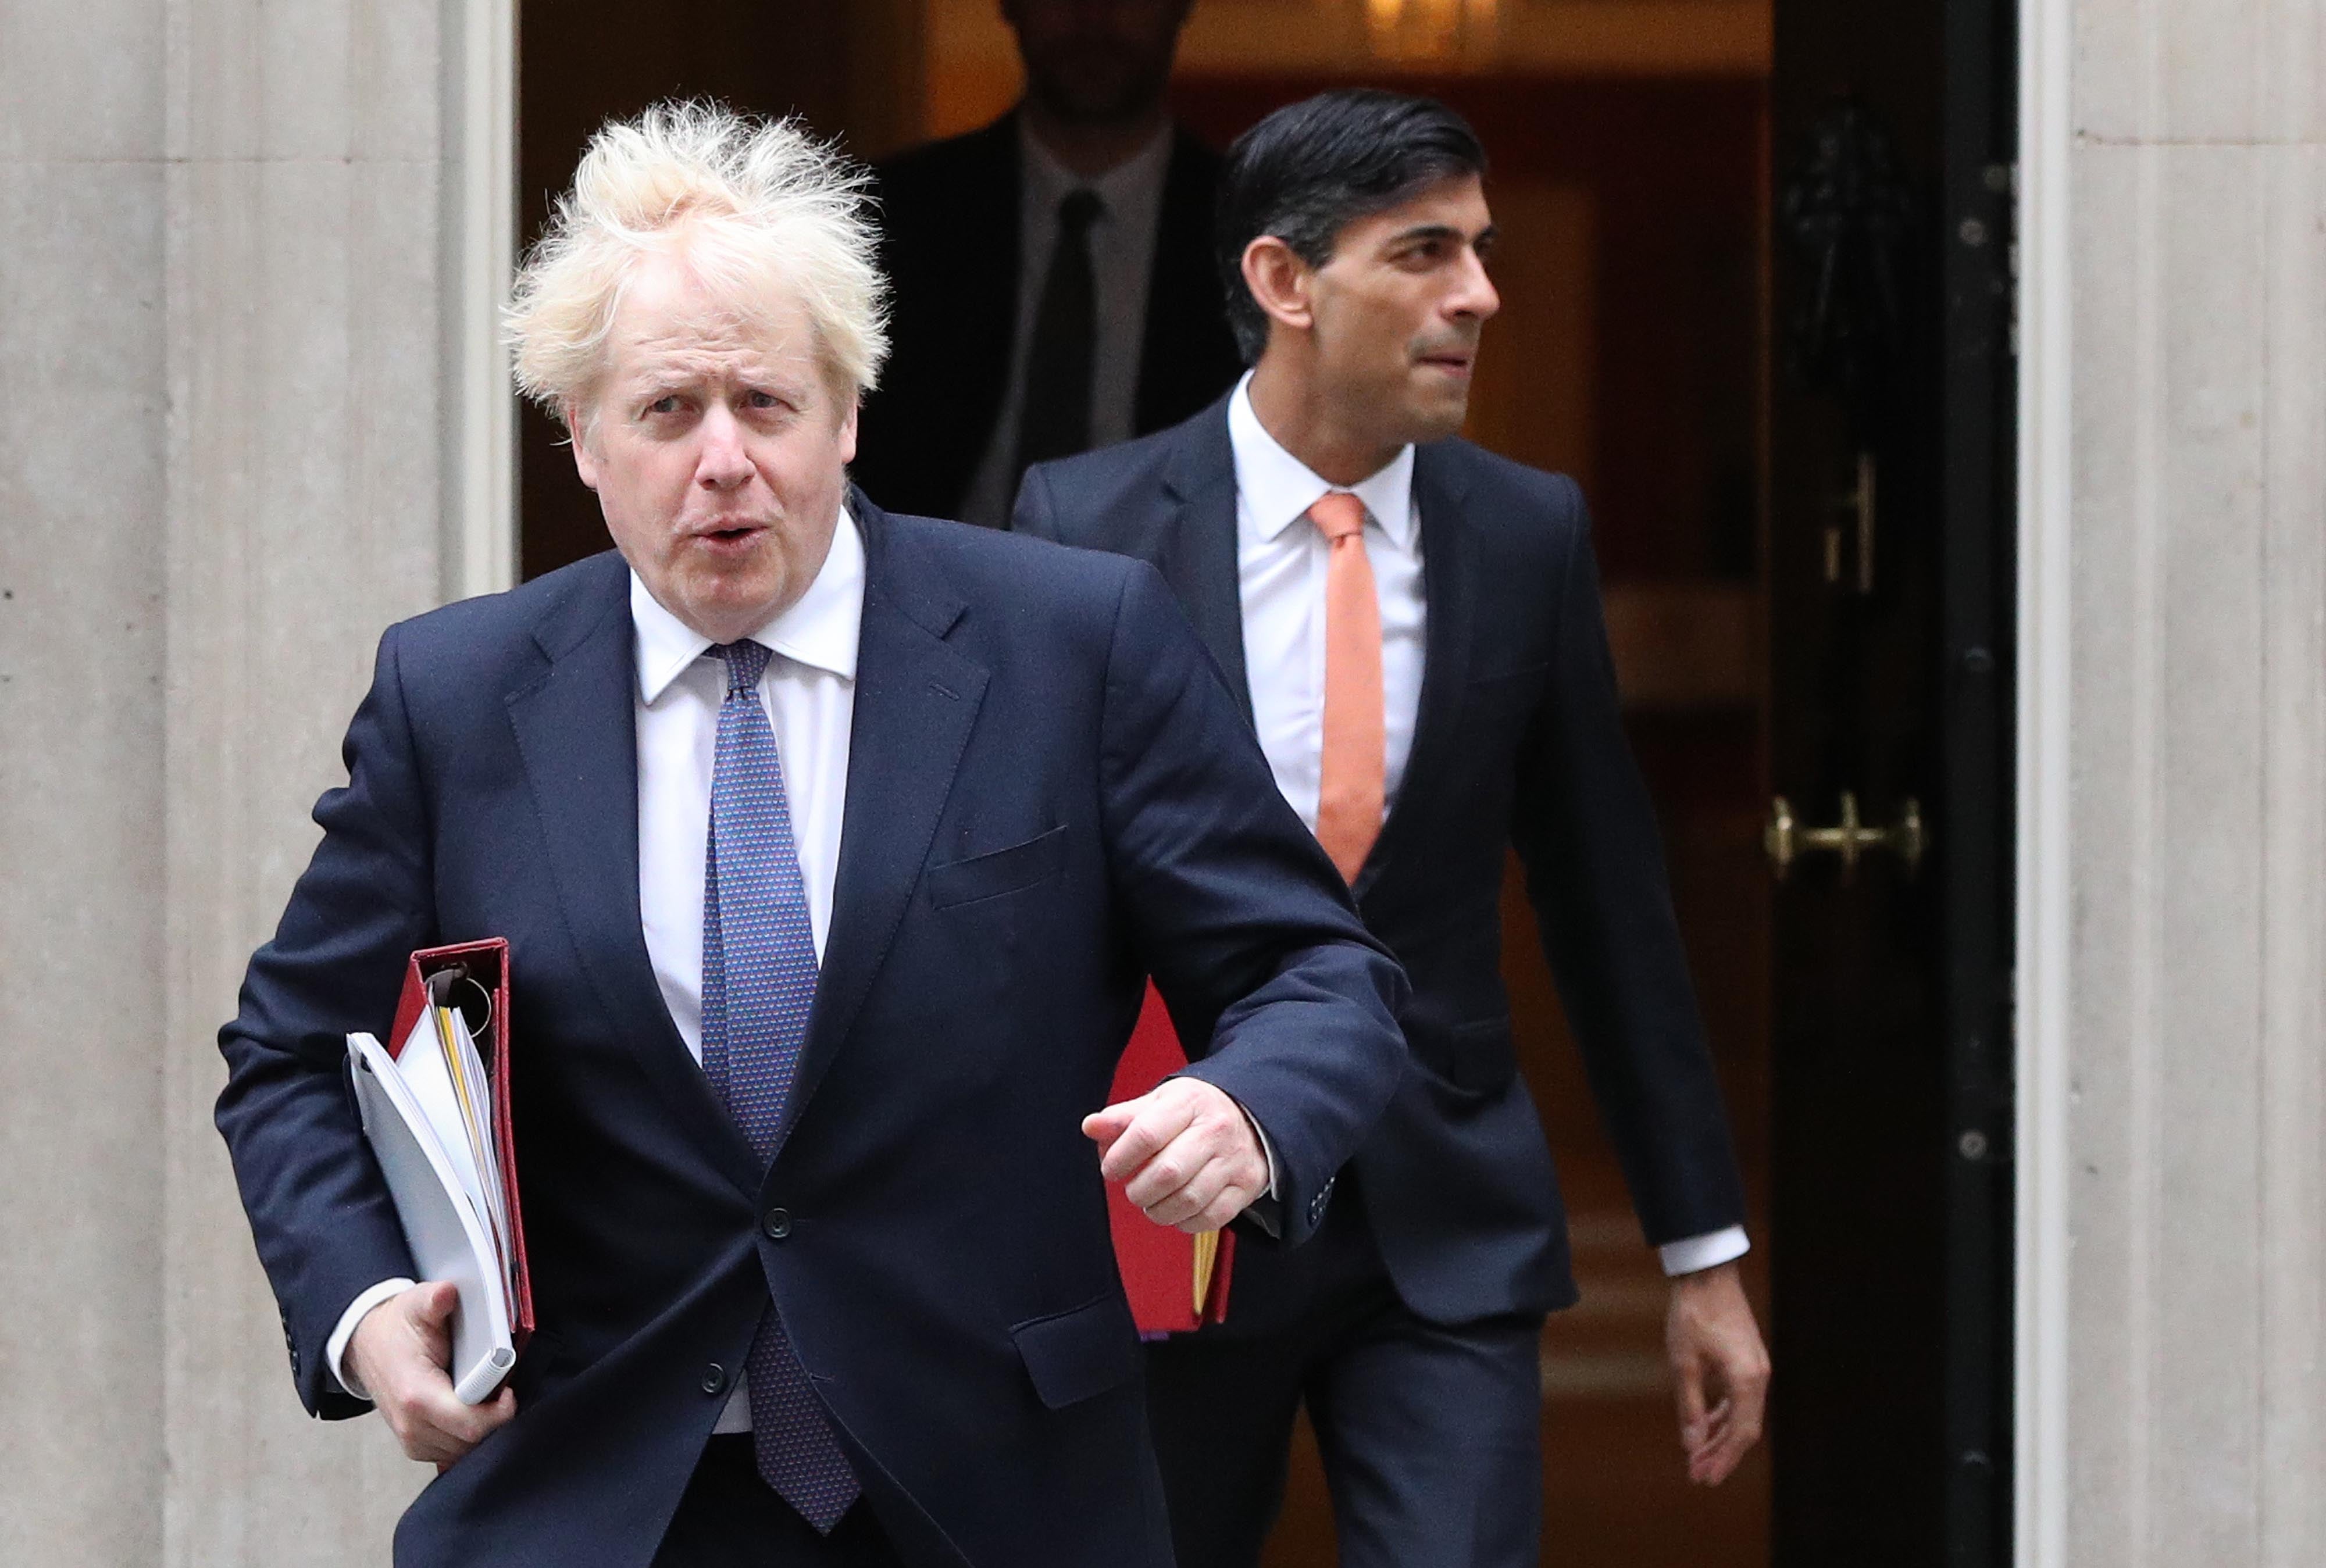 Boris Johnson and Rishi Sunak will be exempt from the legal duty to self-isolate